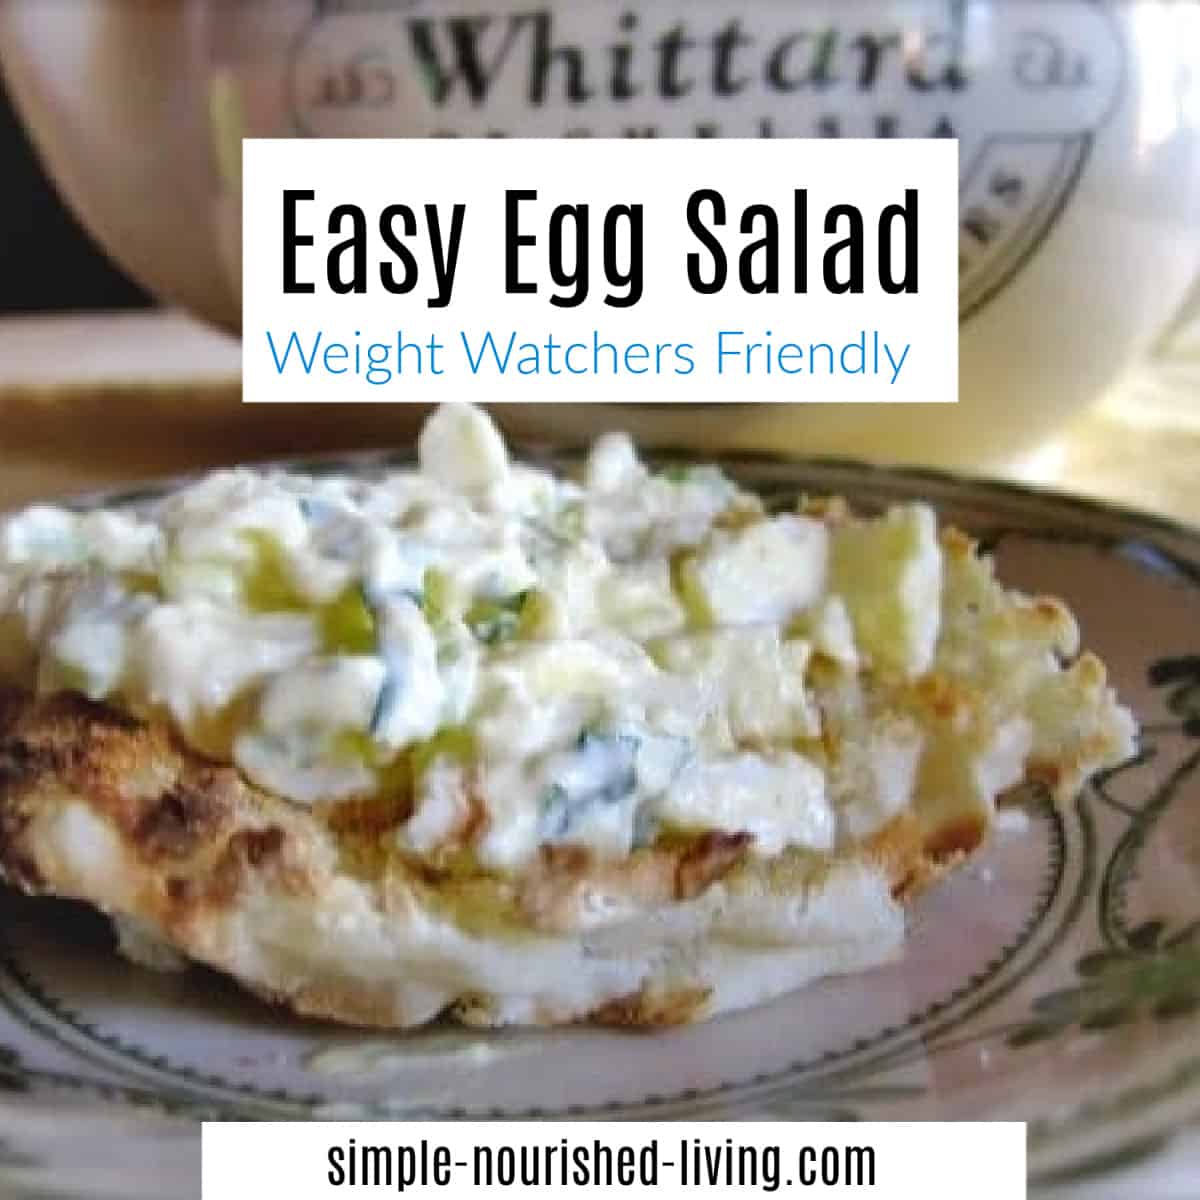 Egg Salad spread on toasted English muffin.